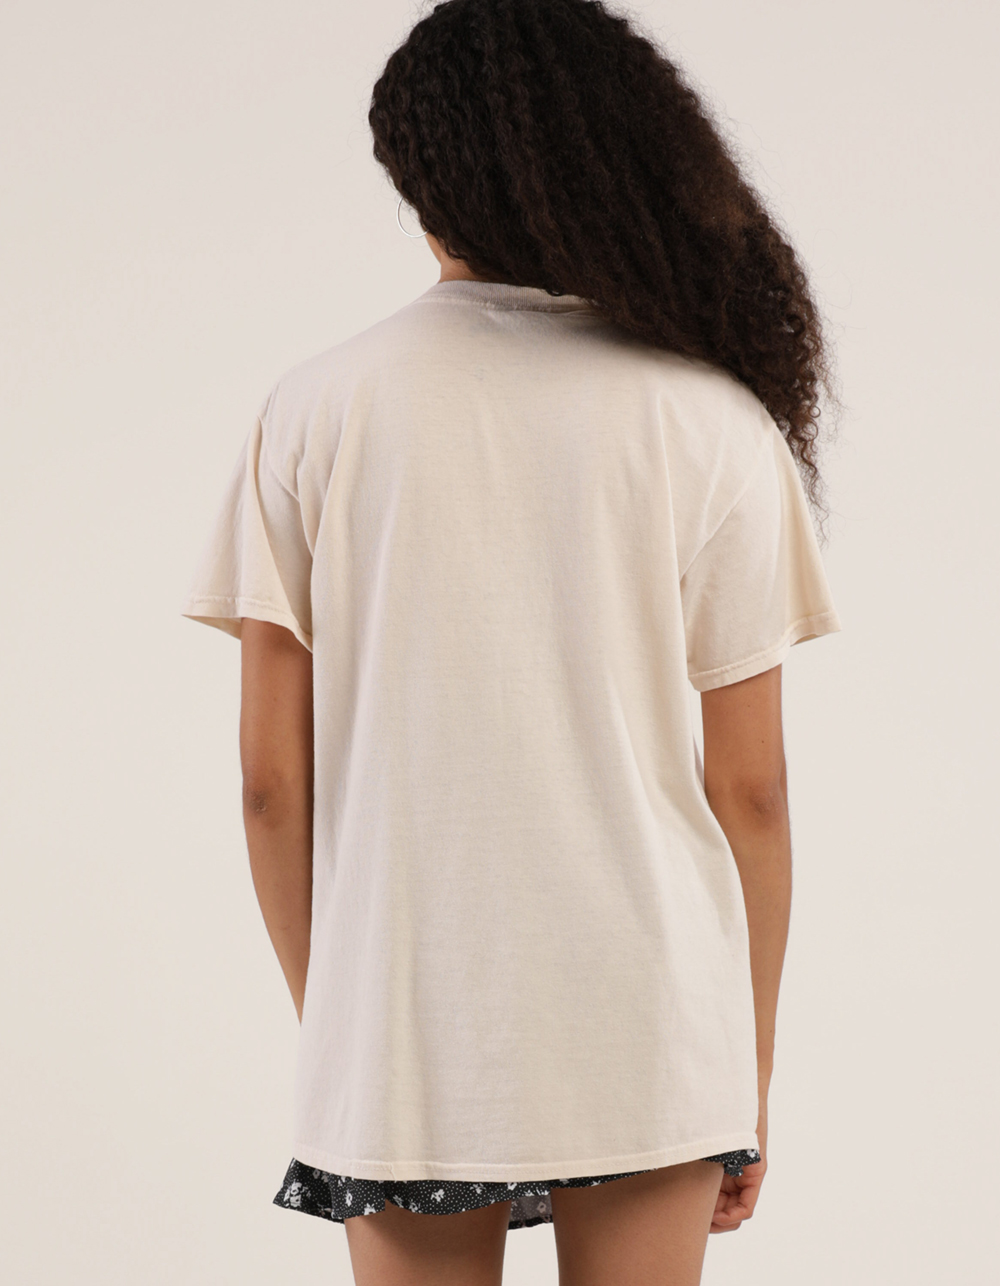 SUBLIME Long Beach Womens Oversized Tee - NATURAL | Tillys